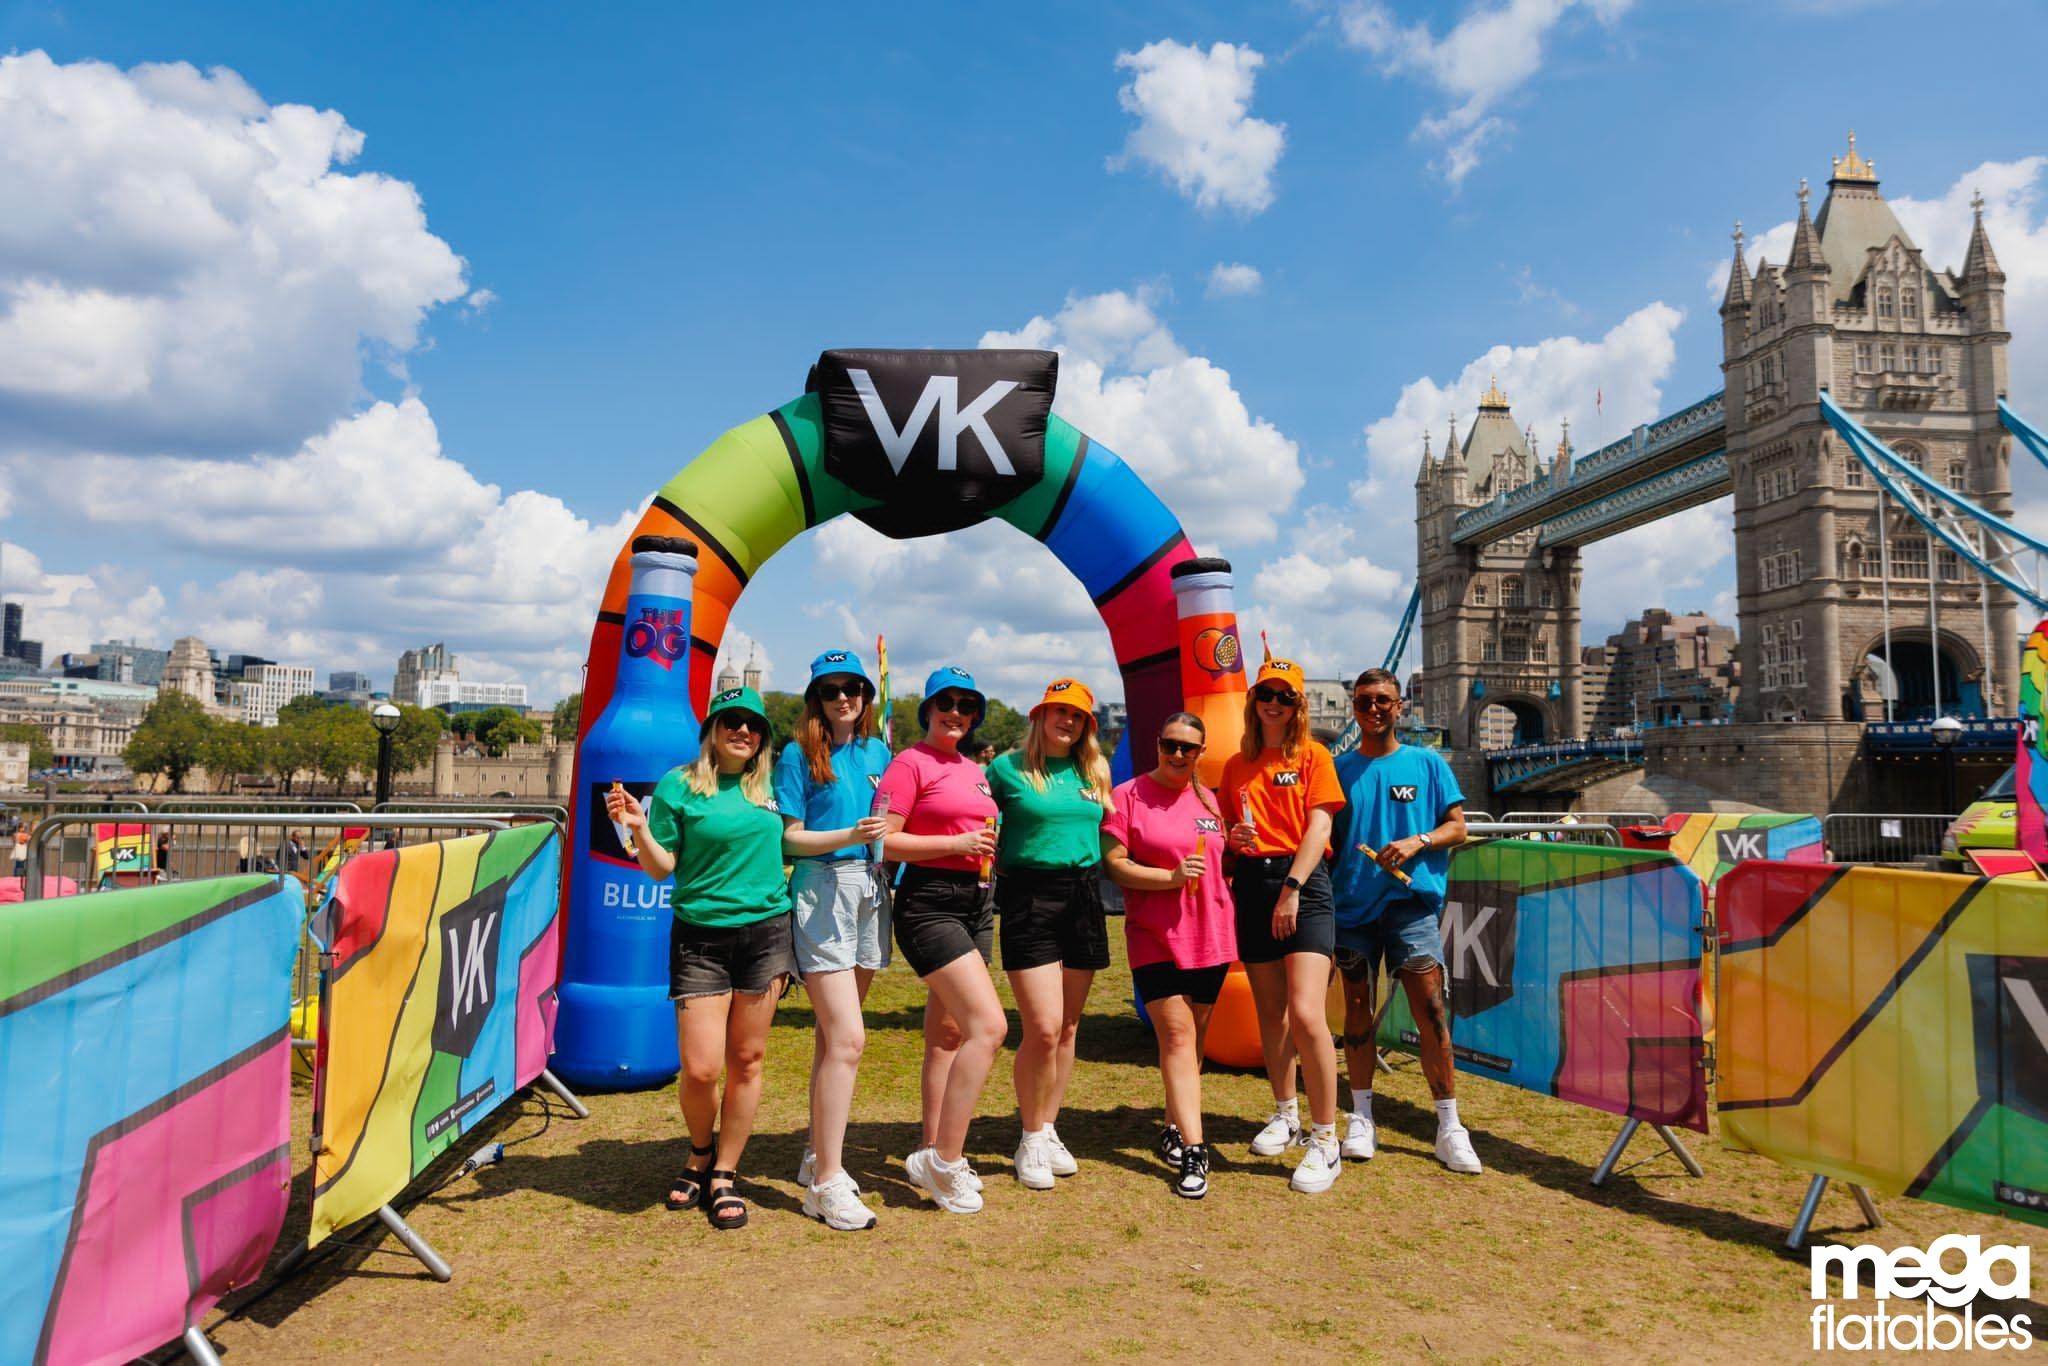 Branded inflatable VK arch infront of tower bridge